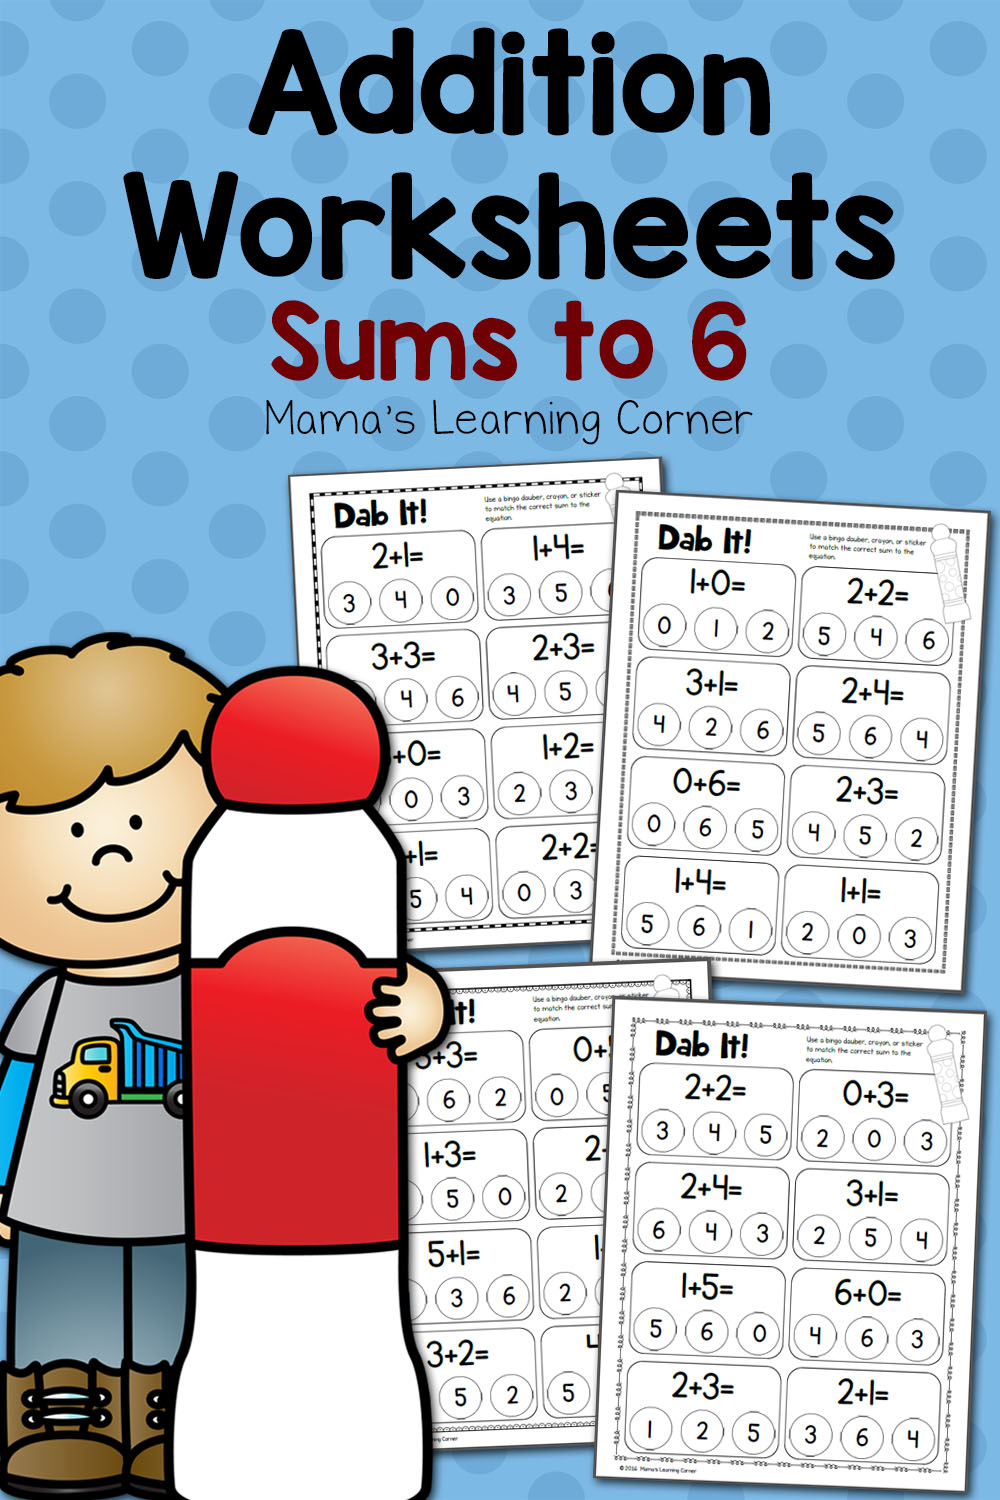 Dab It! Addition Worksheets Sums to 6